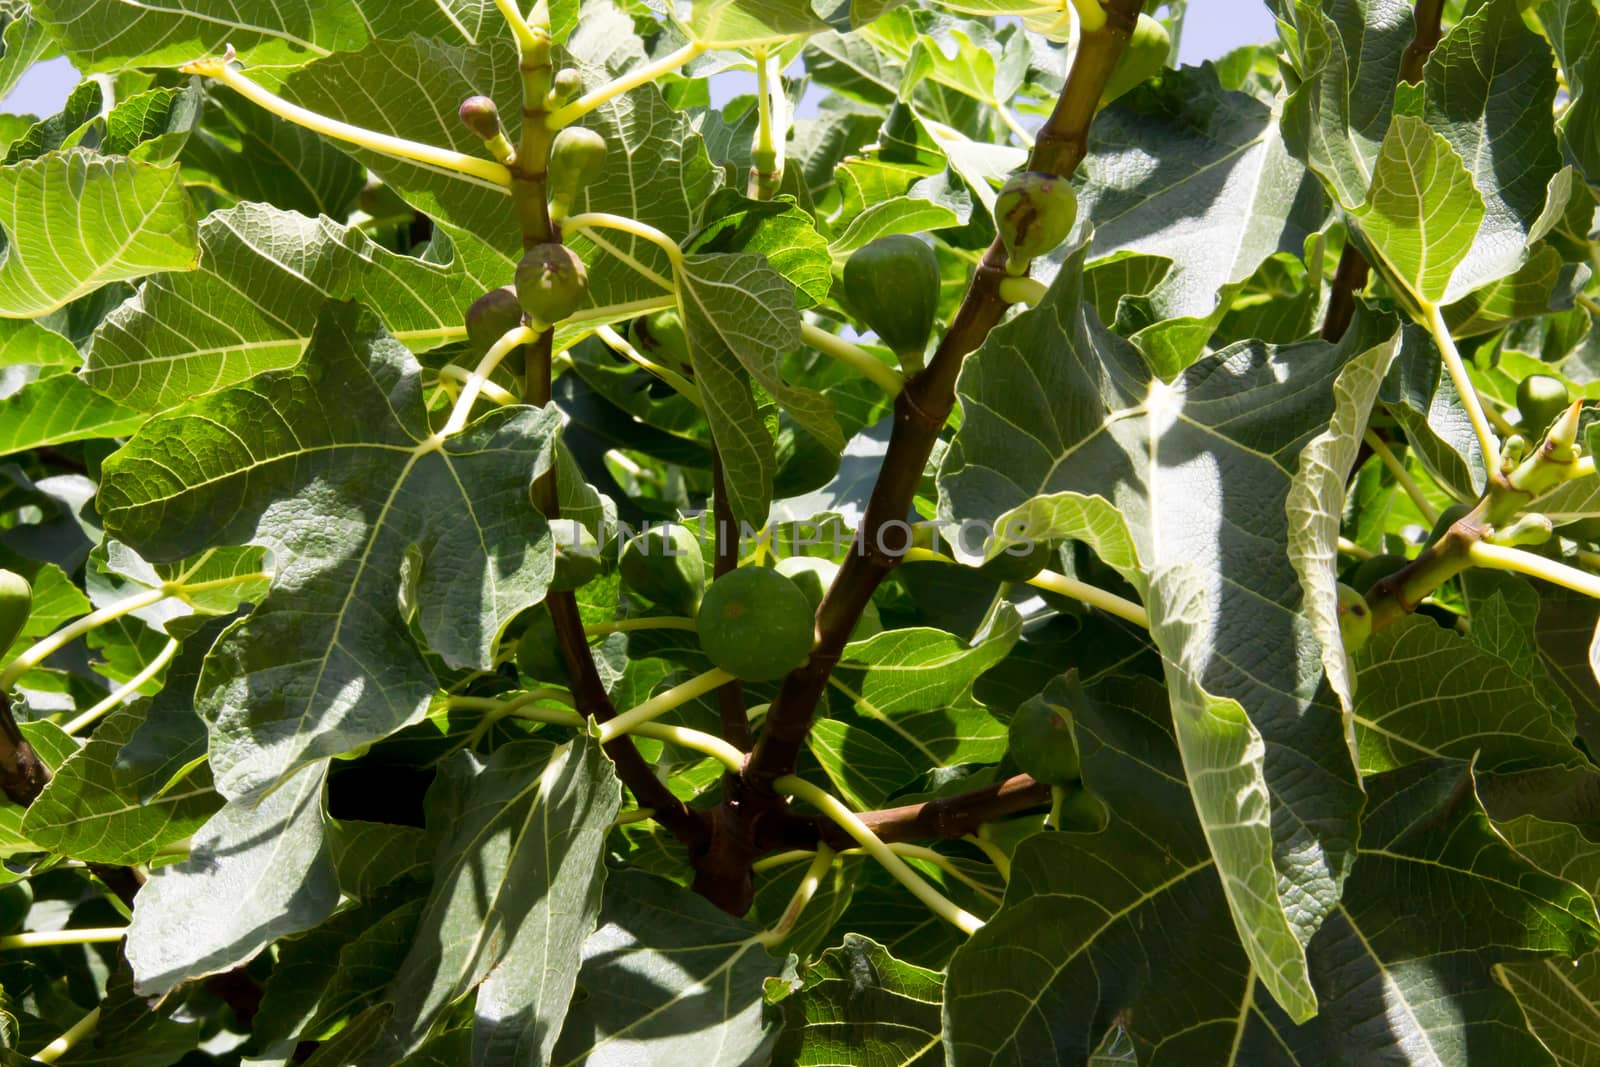 Fig tree seen up close in daylight